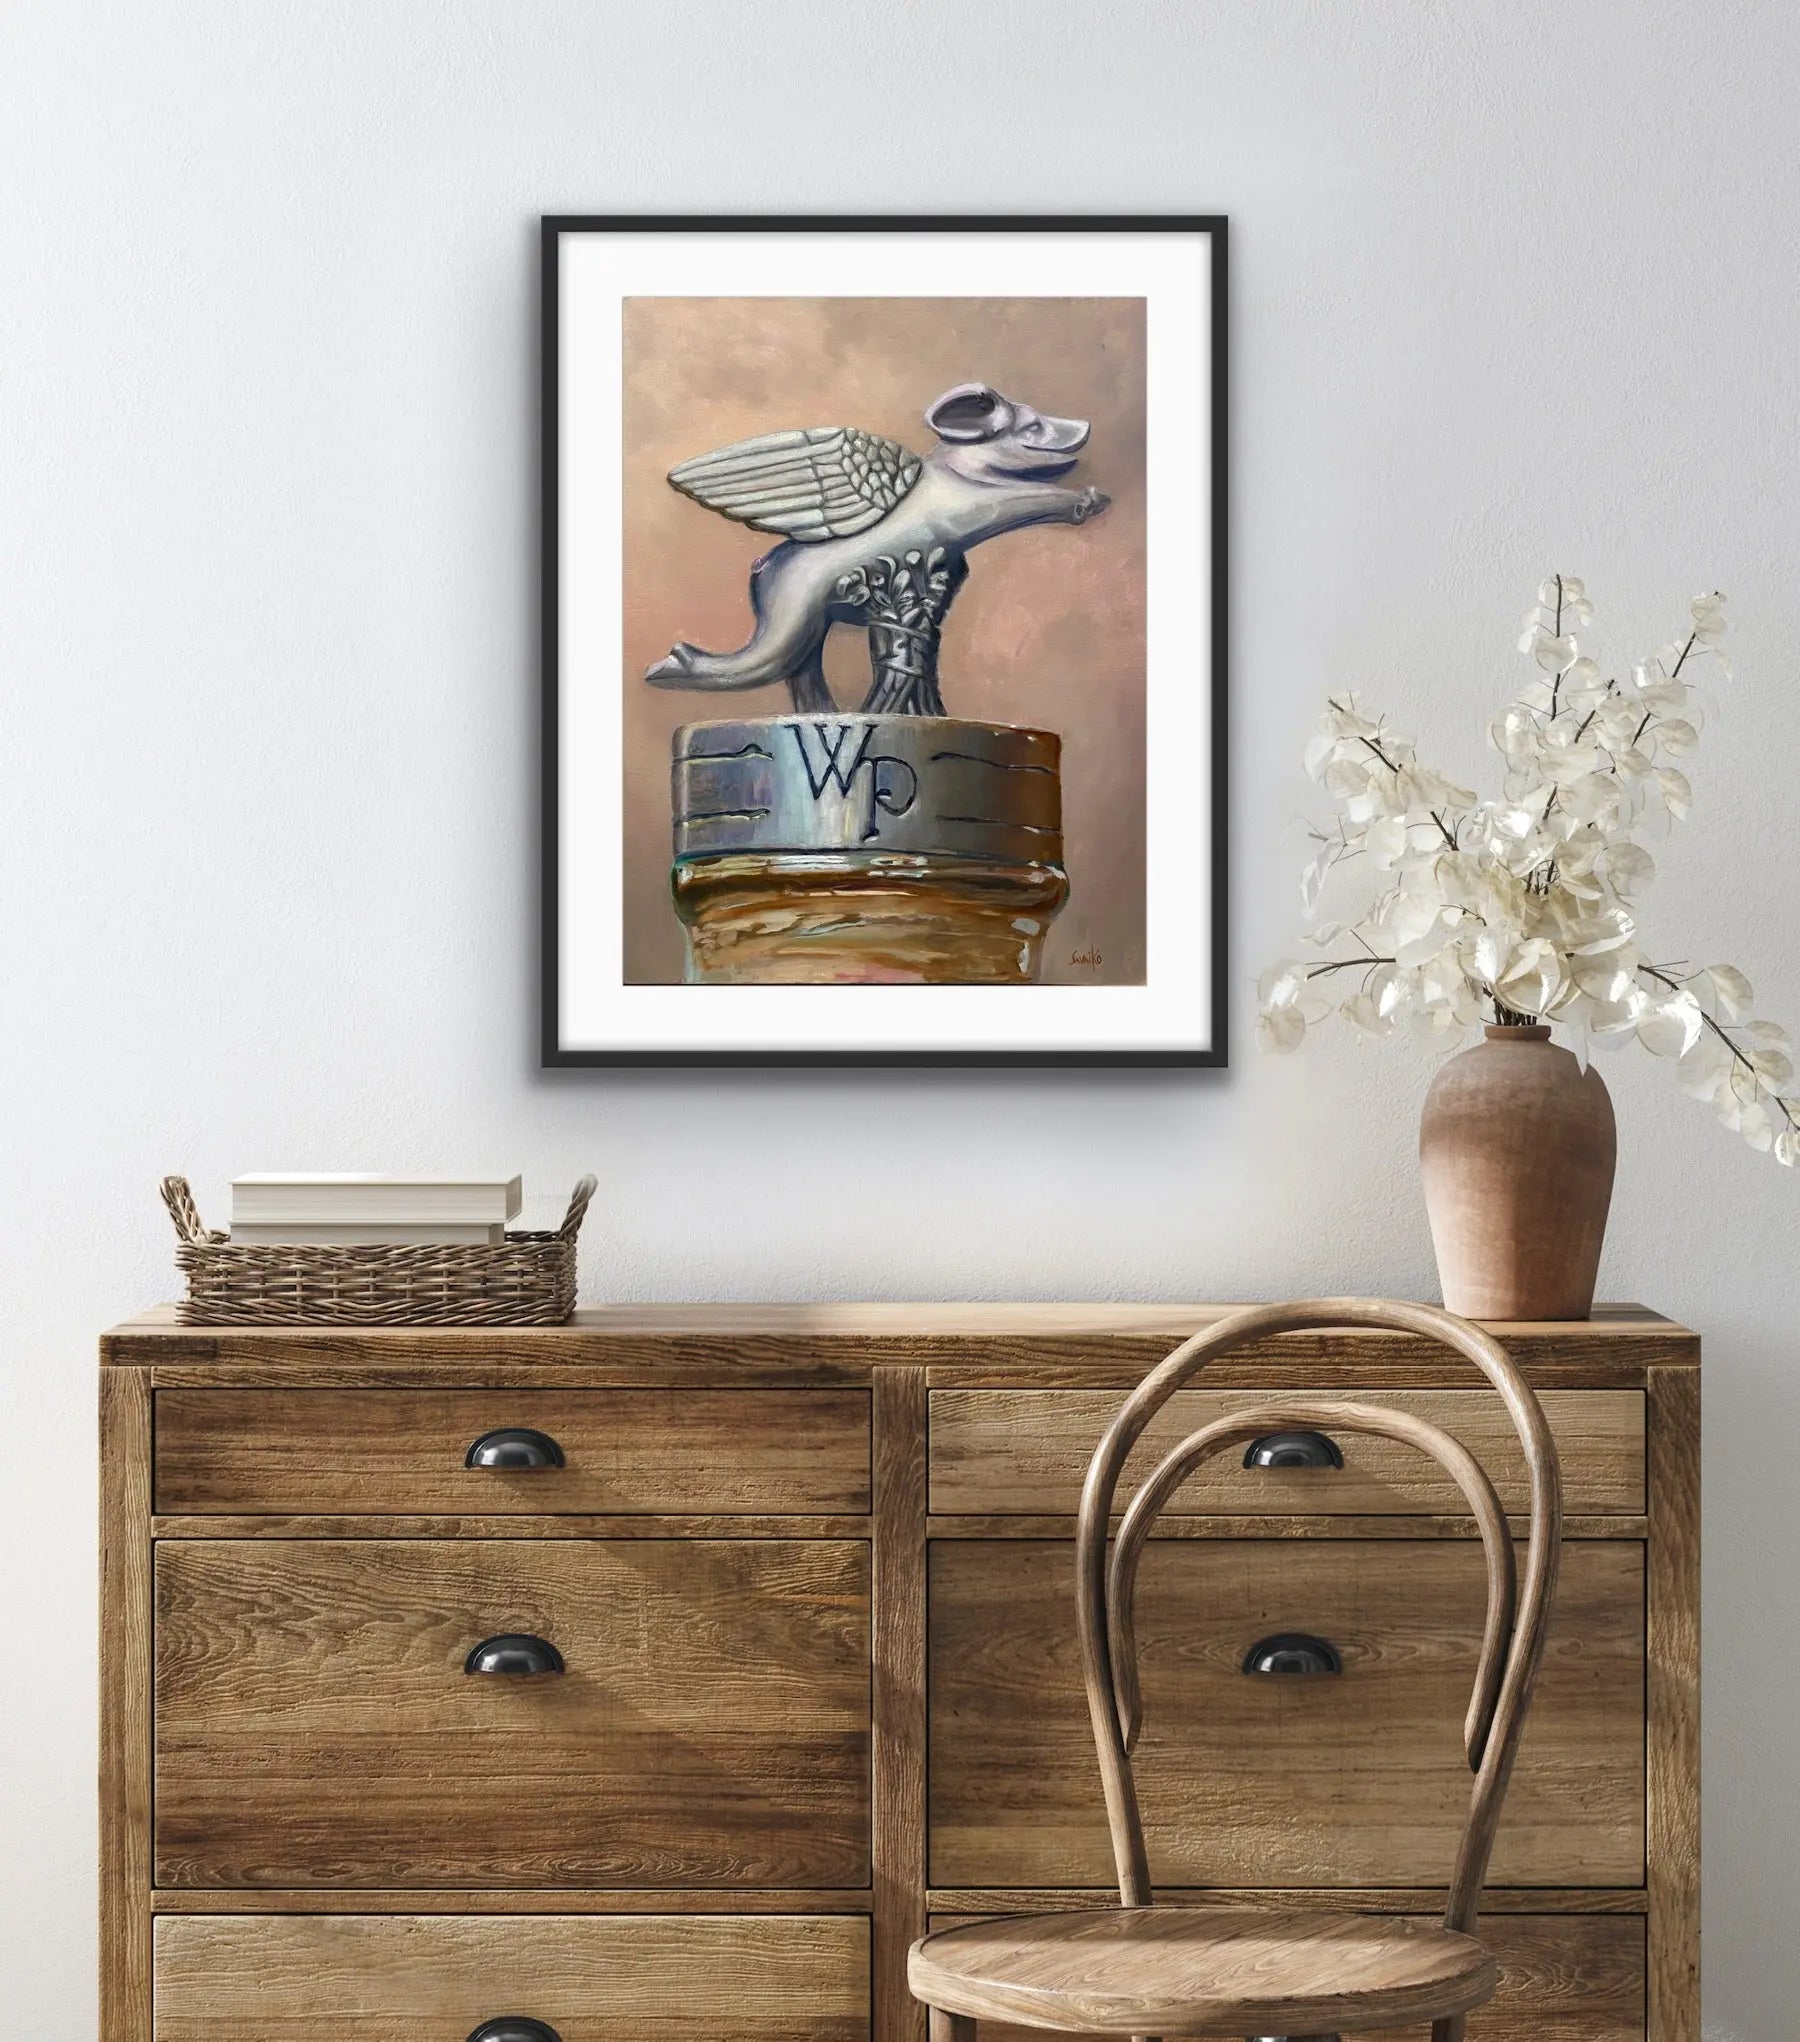 Limited Edition Print - Whistle Pig Rye whiskey - When Pigs Can Fly!